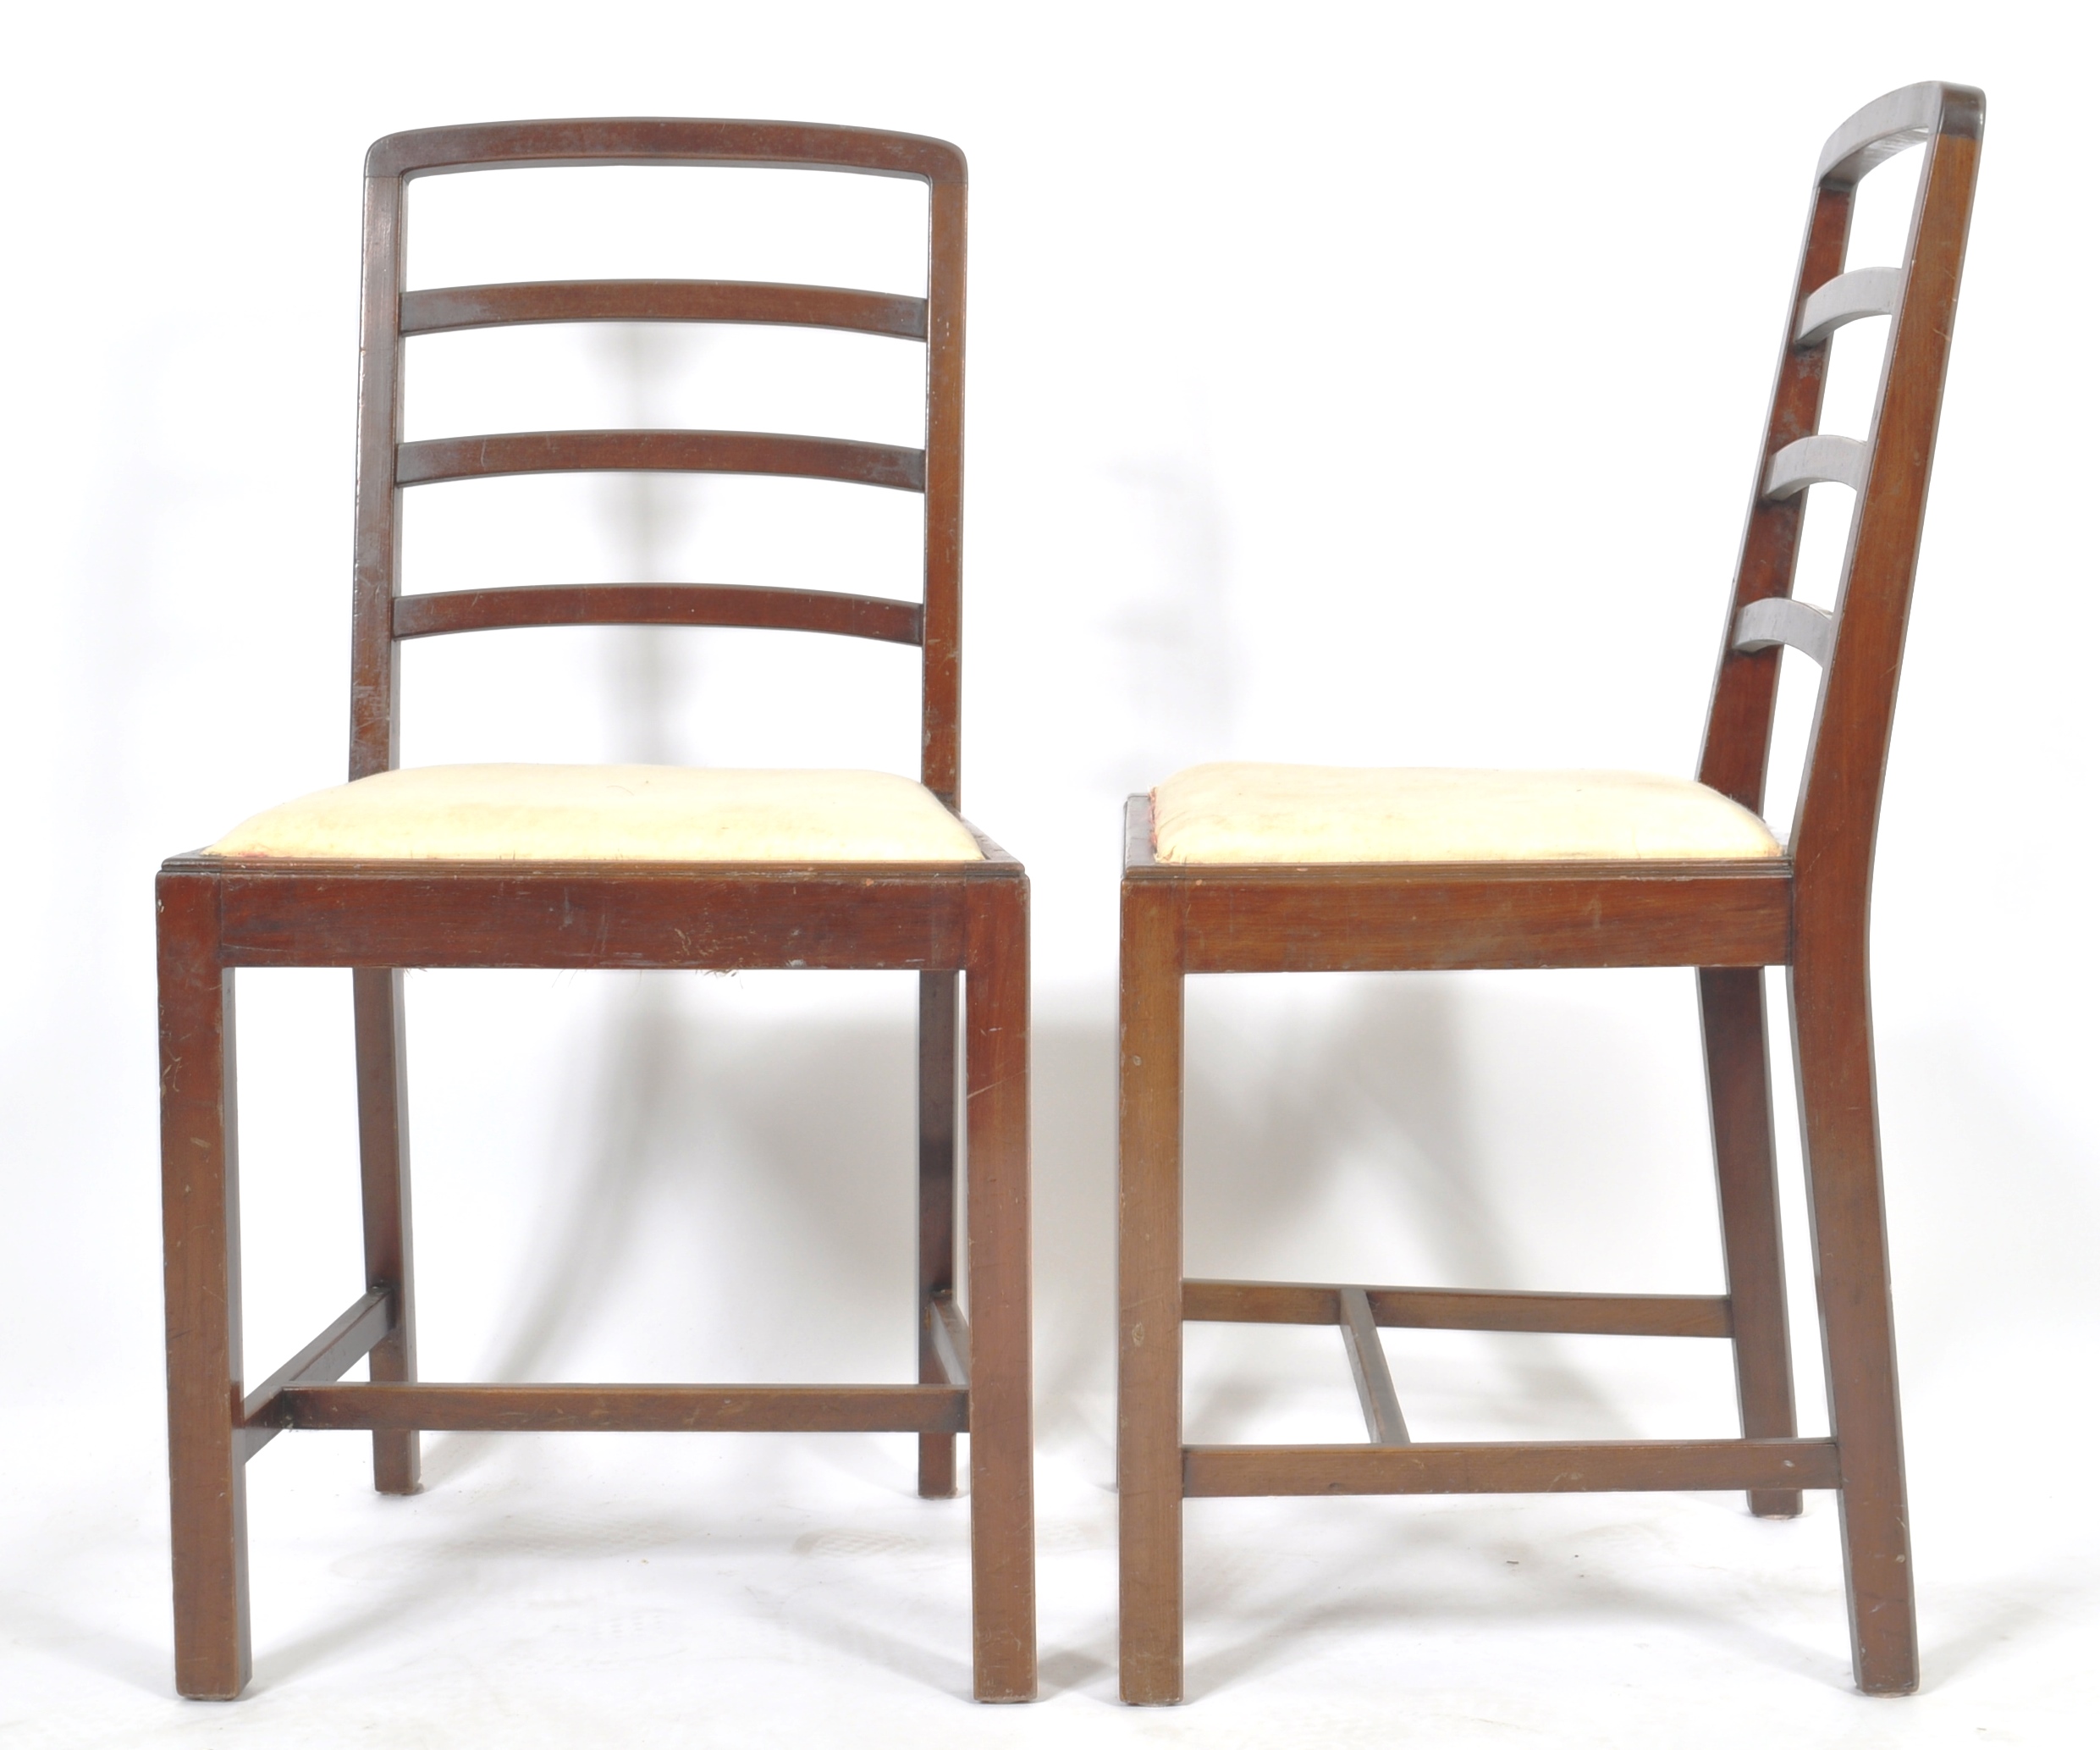 HEALS OF LONDON ORIGINAL SET OF DINING CHAIRS - Image 6 of 7